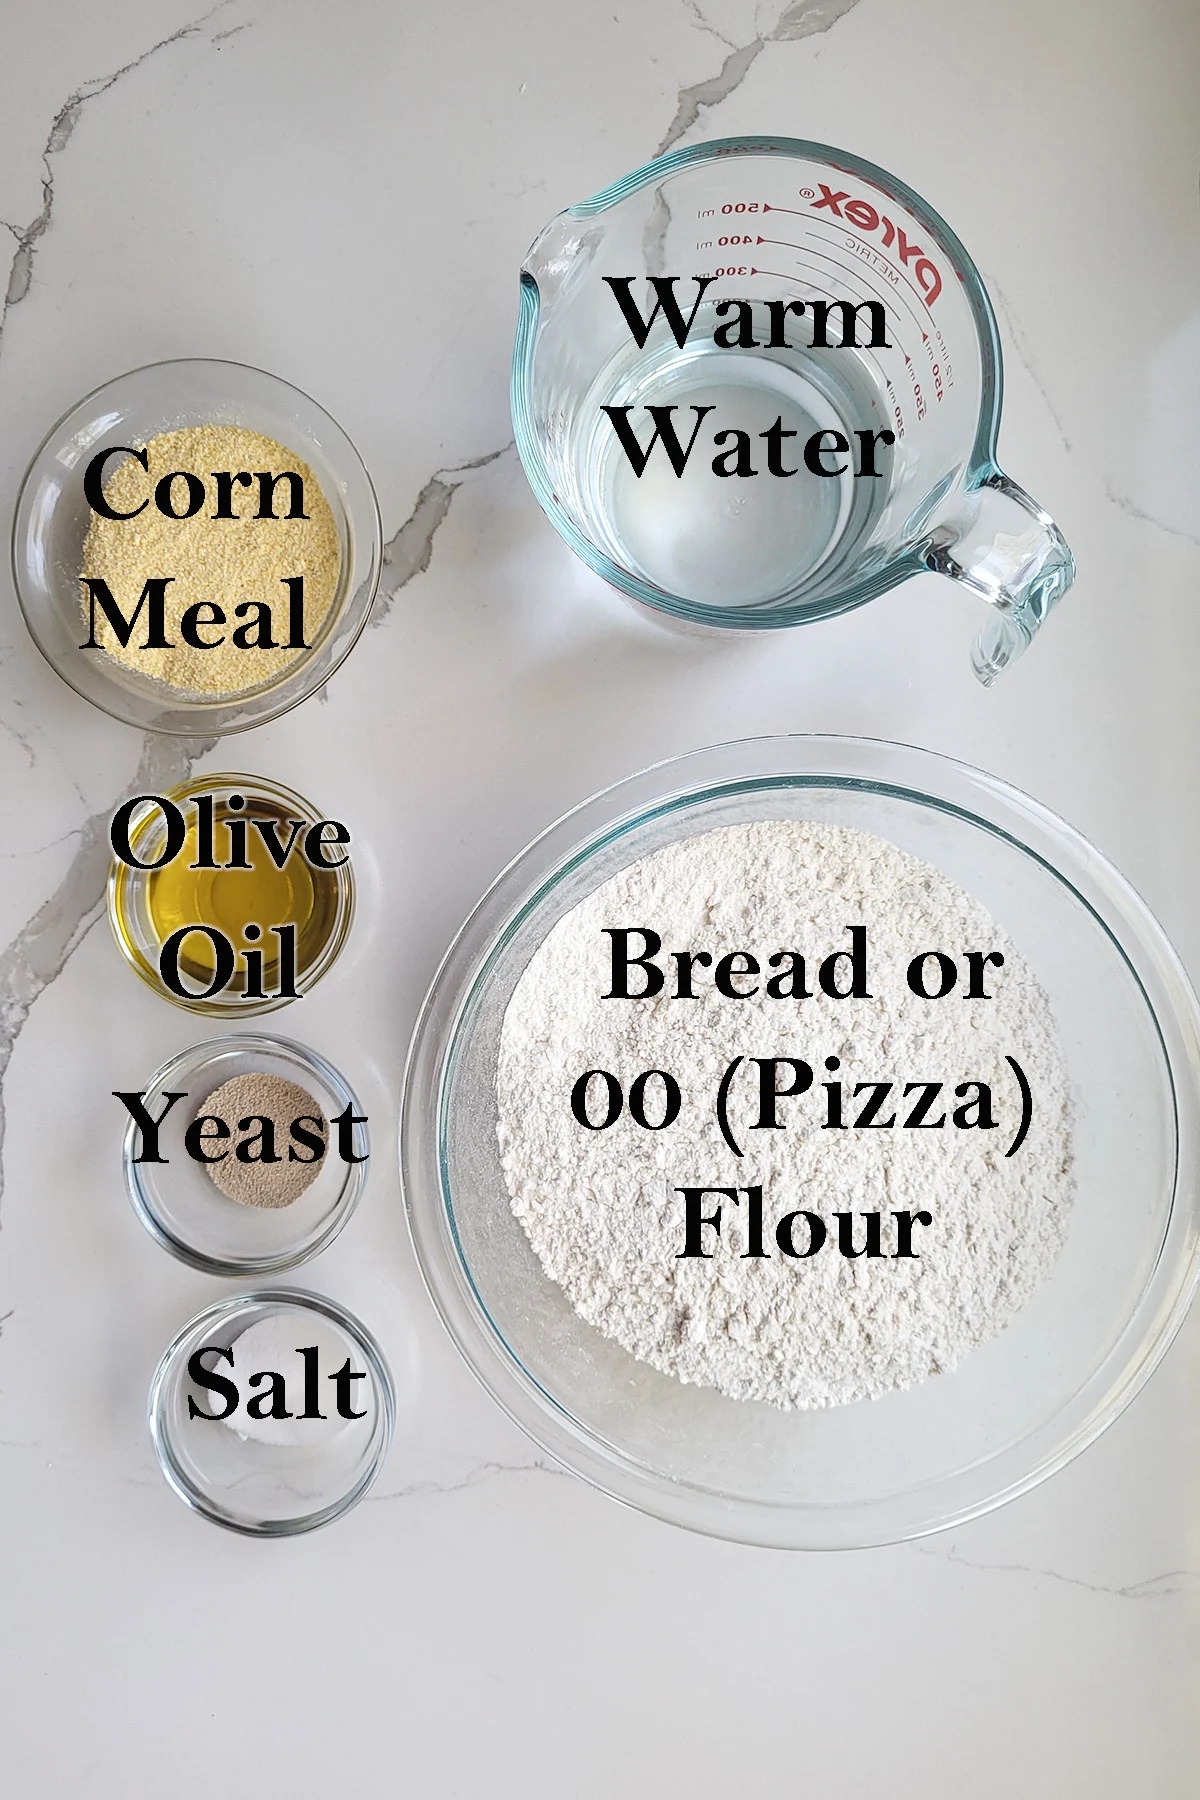 ingredients for pizza dough in bowls on a white surface.